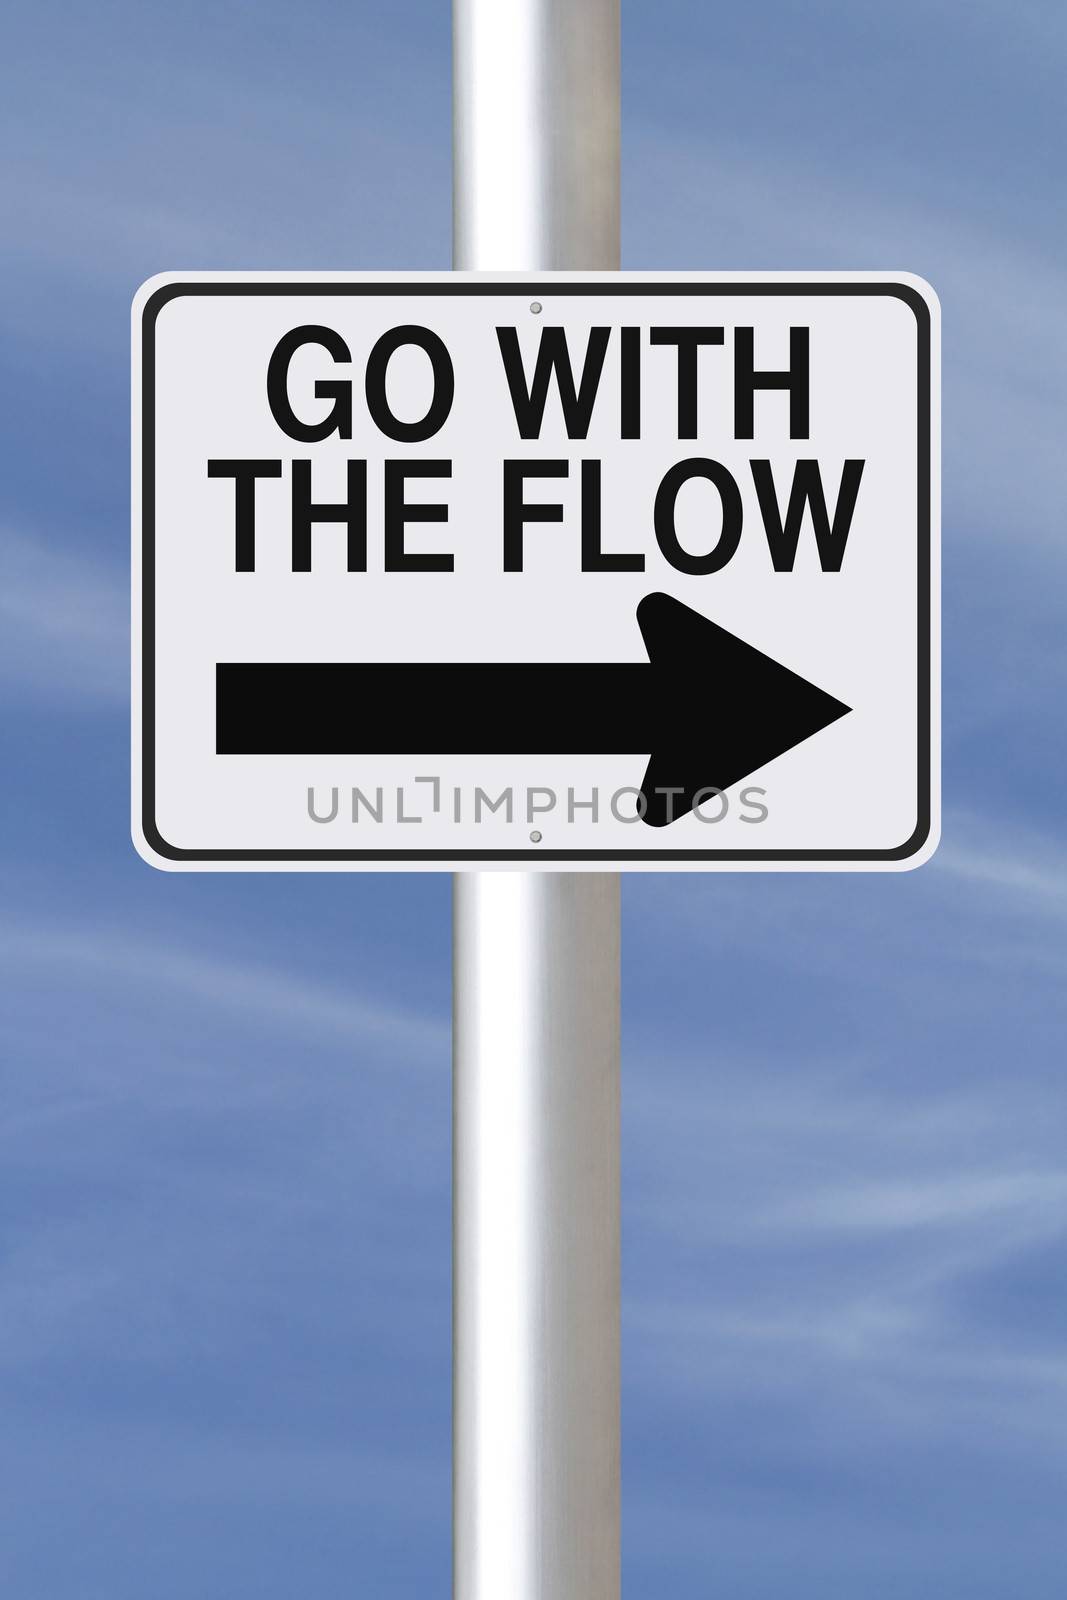 A modified one way street sign indicating Go With The Flow